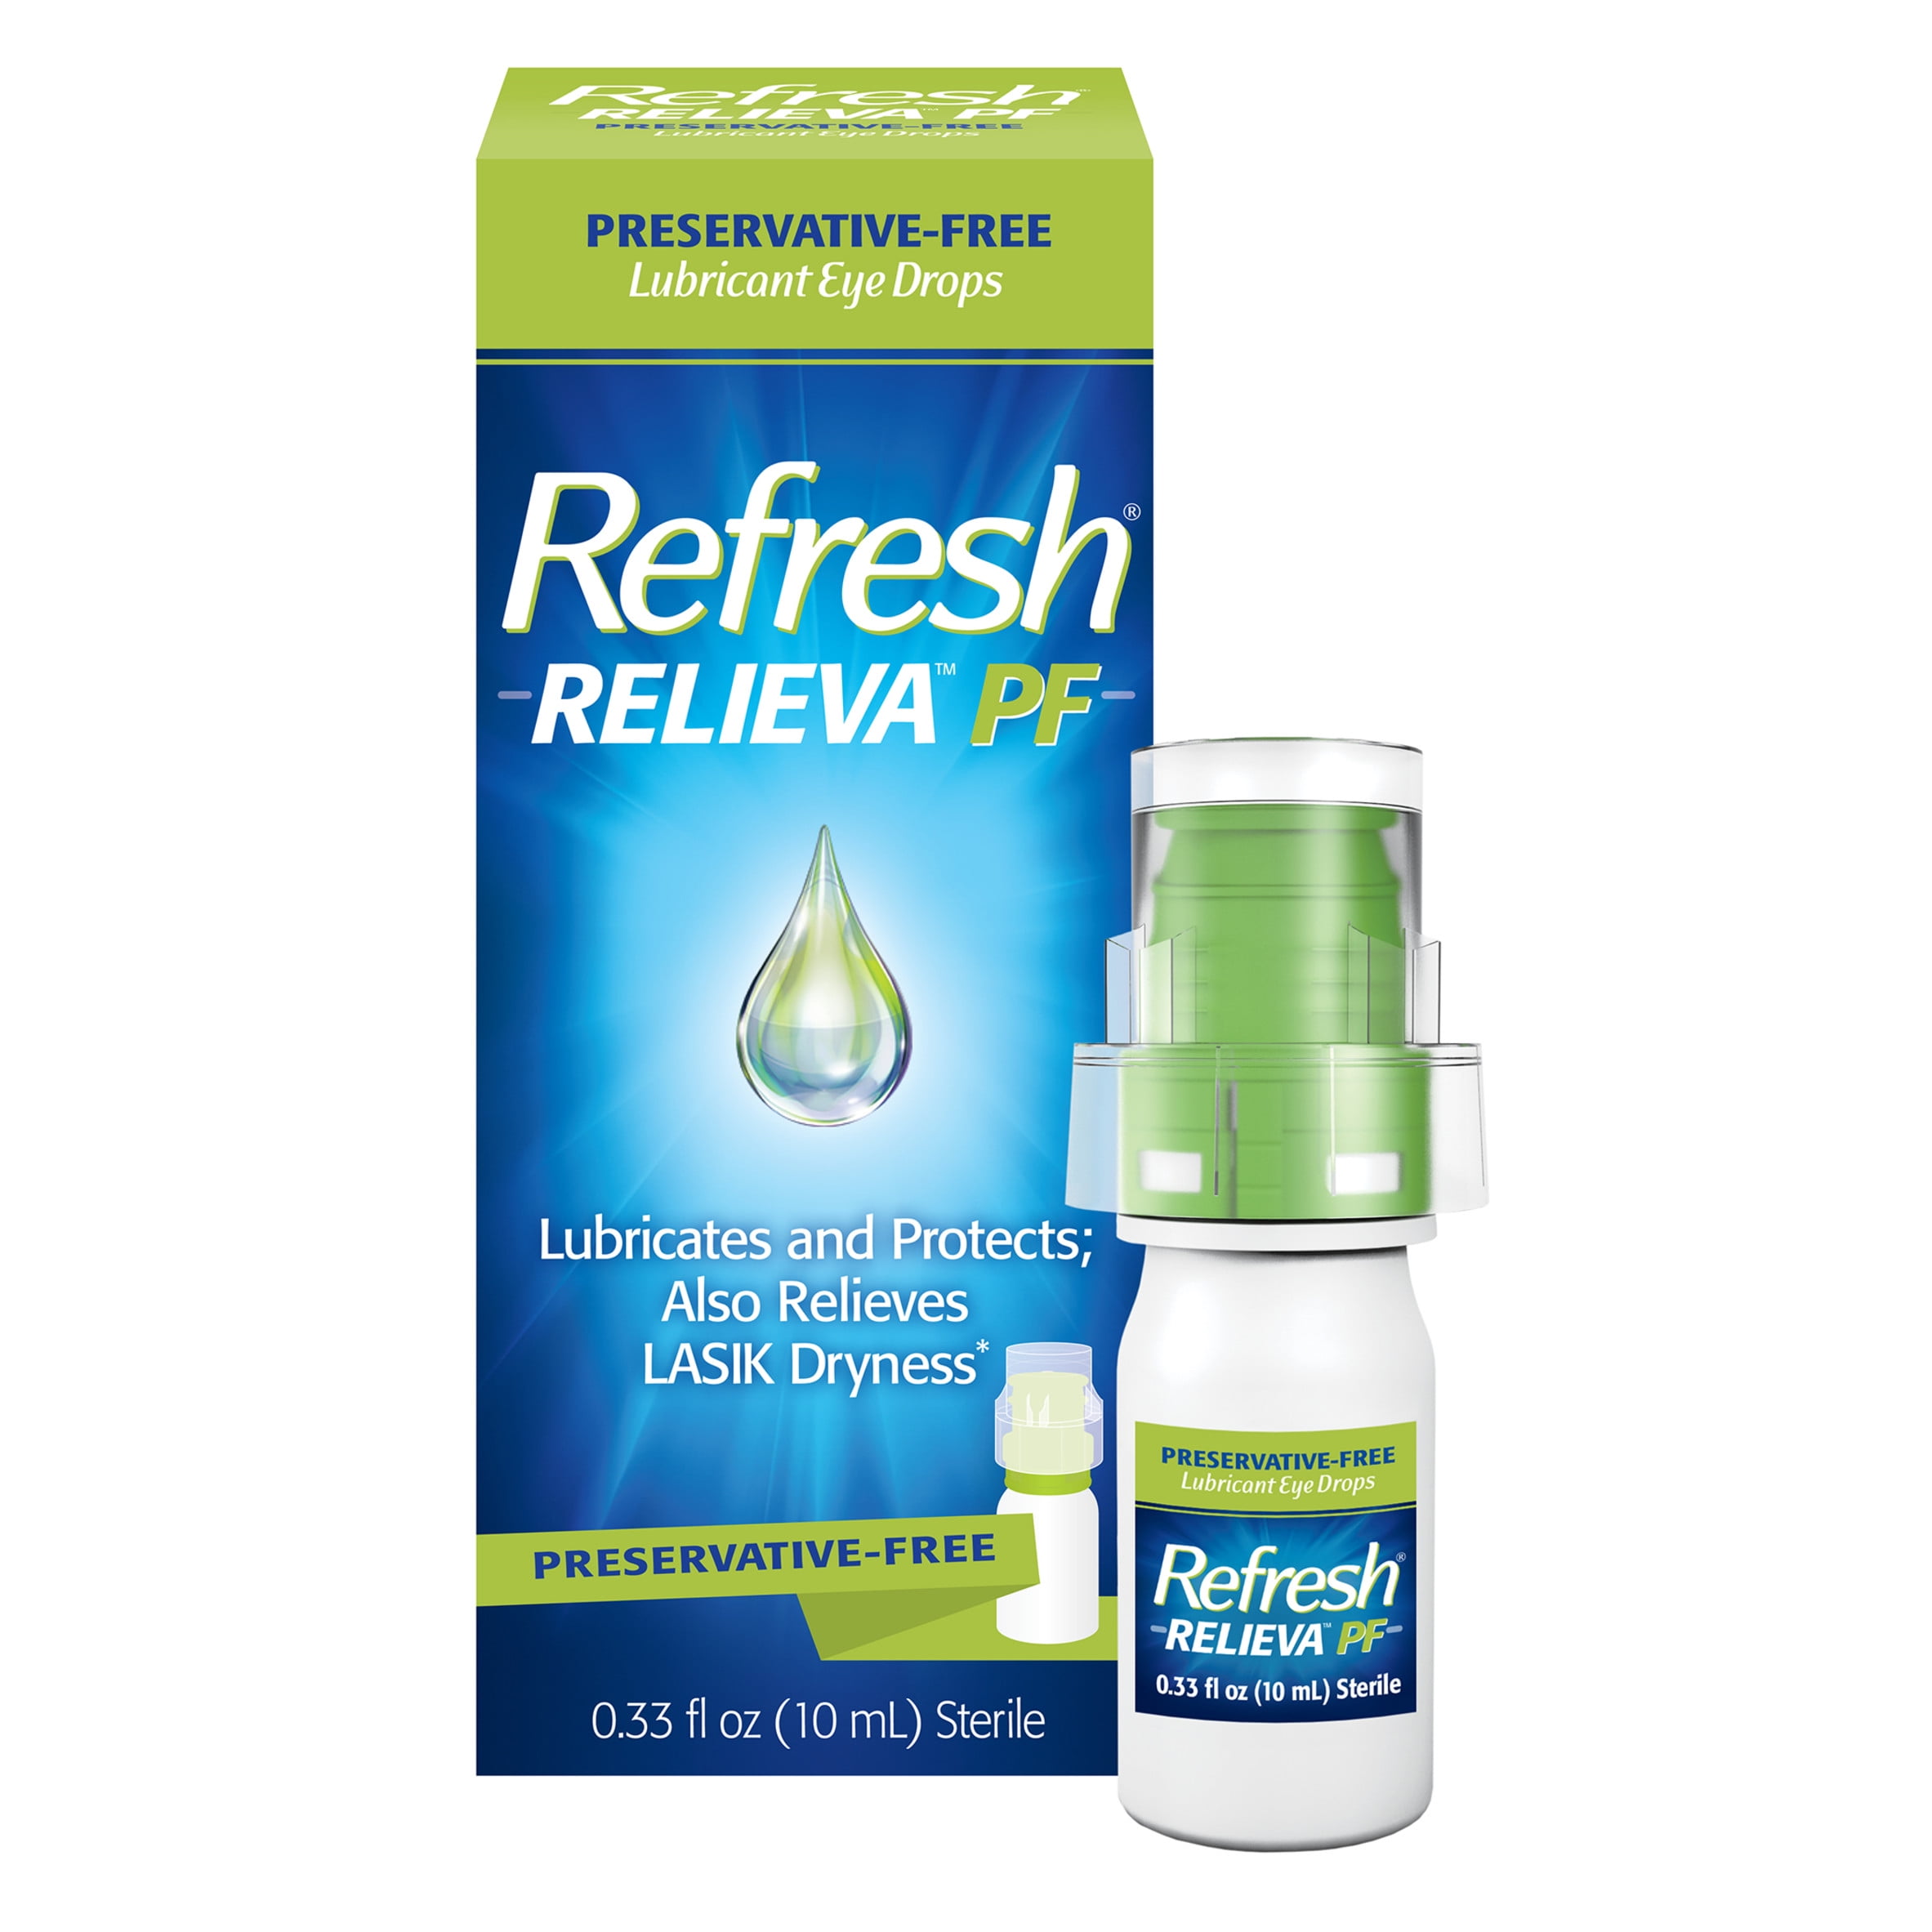 Refresh Relieva Preservative-Free Non-Preserved Tears Lubricant Eye Drops, 10 mL